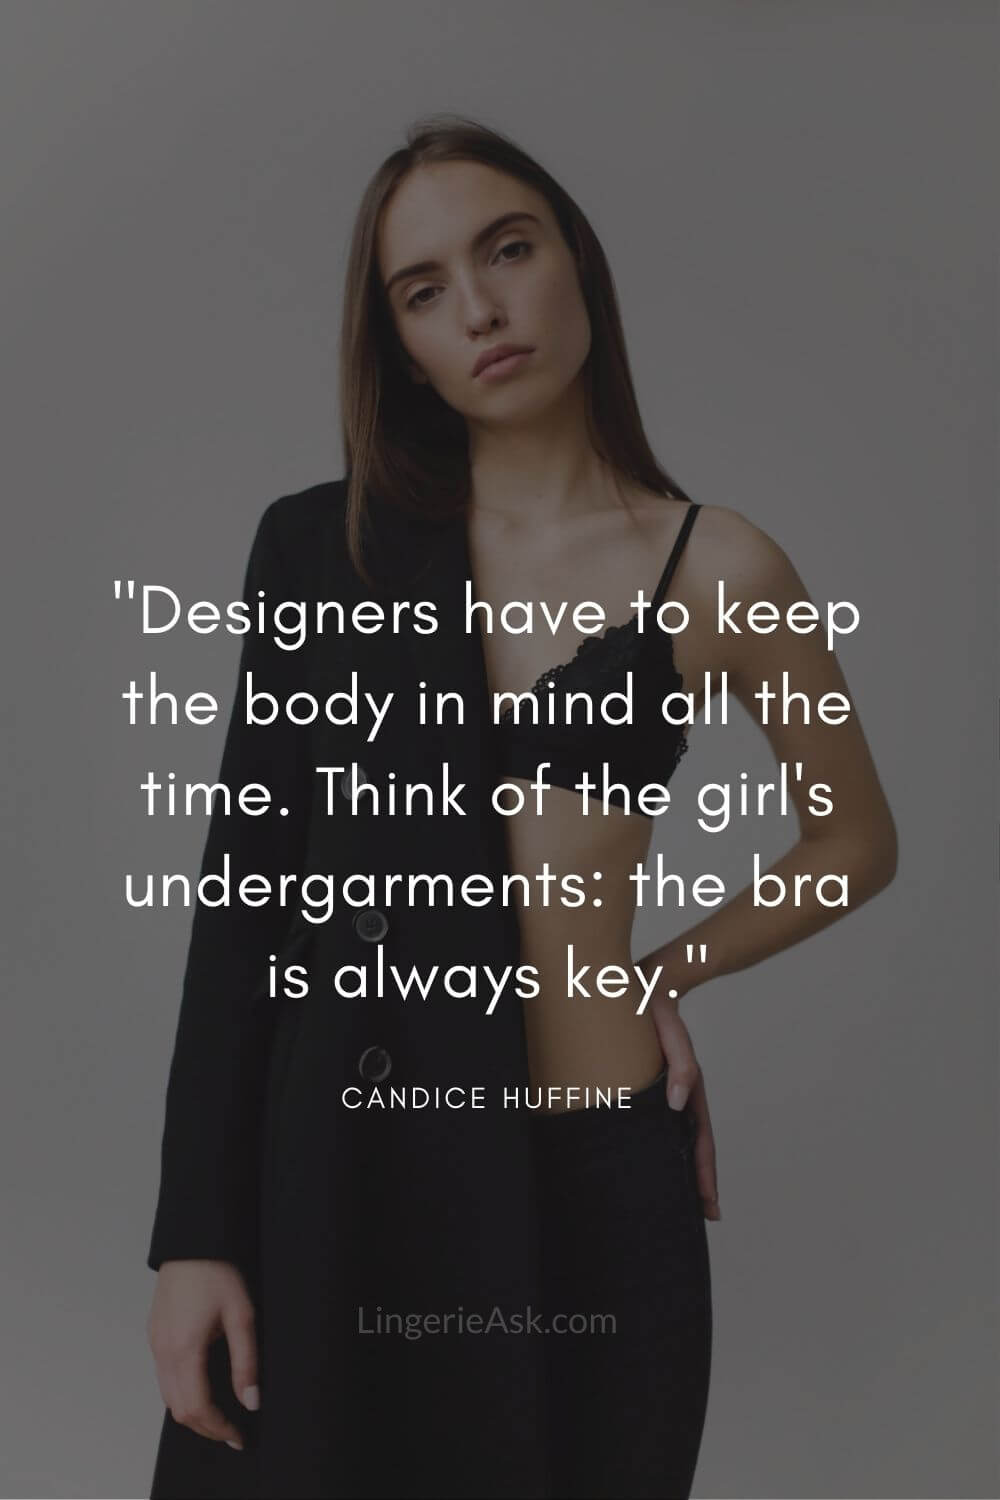 Designers have to keep the body in mind all the time. Think of the girl's undergarments the bra is always key. Candice Huffine